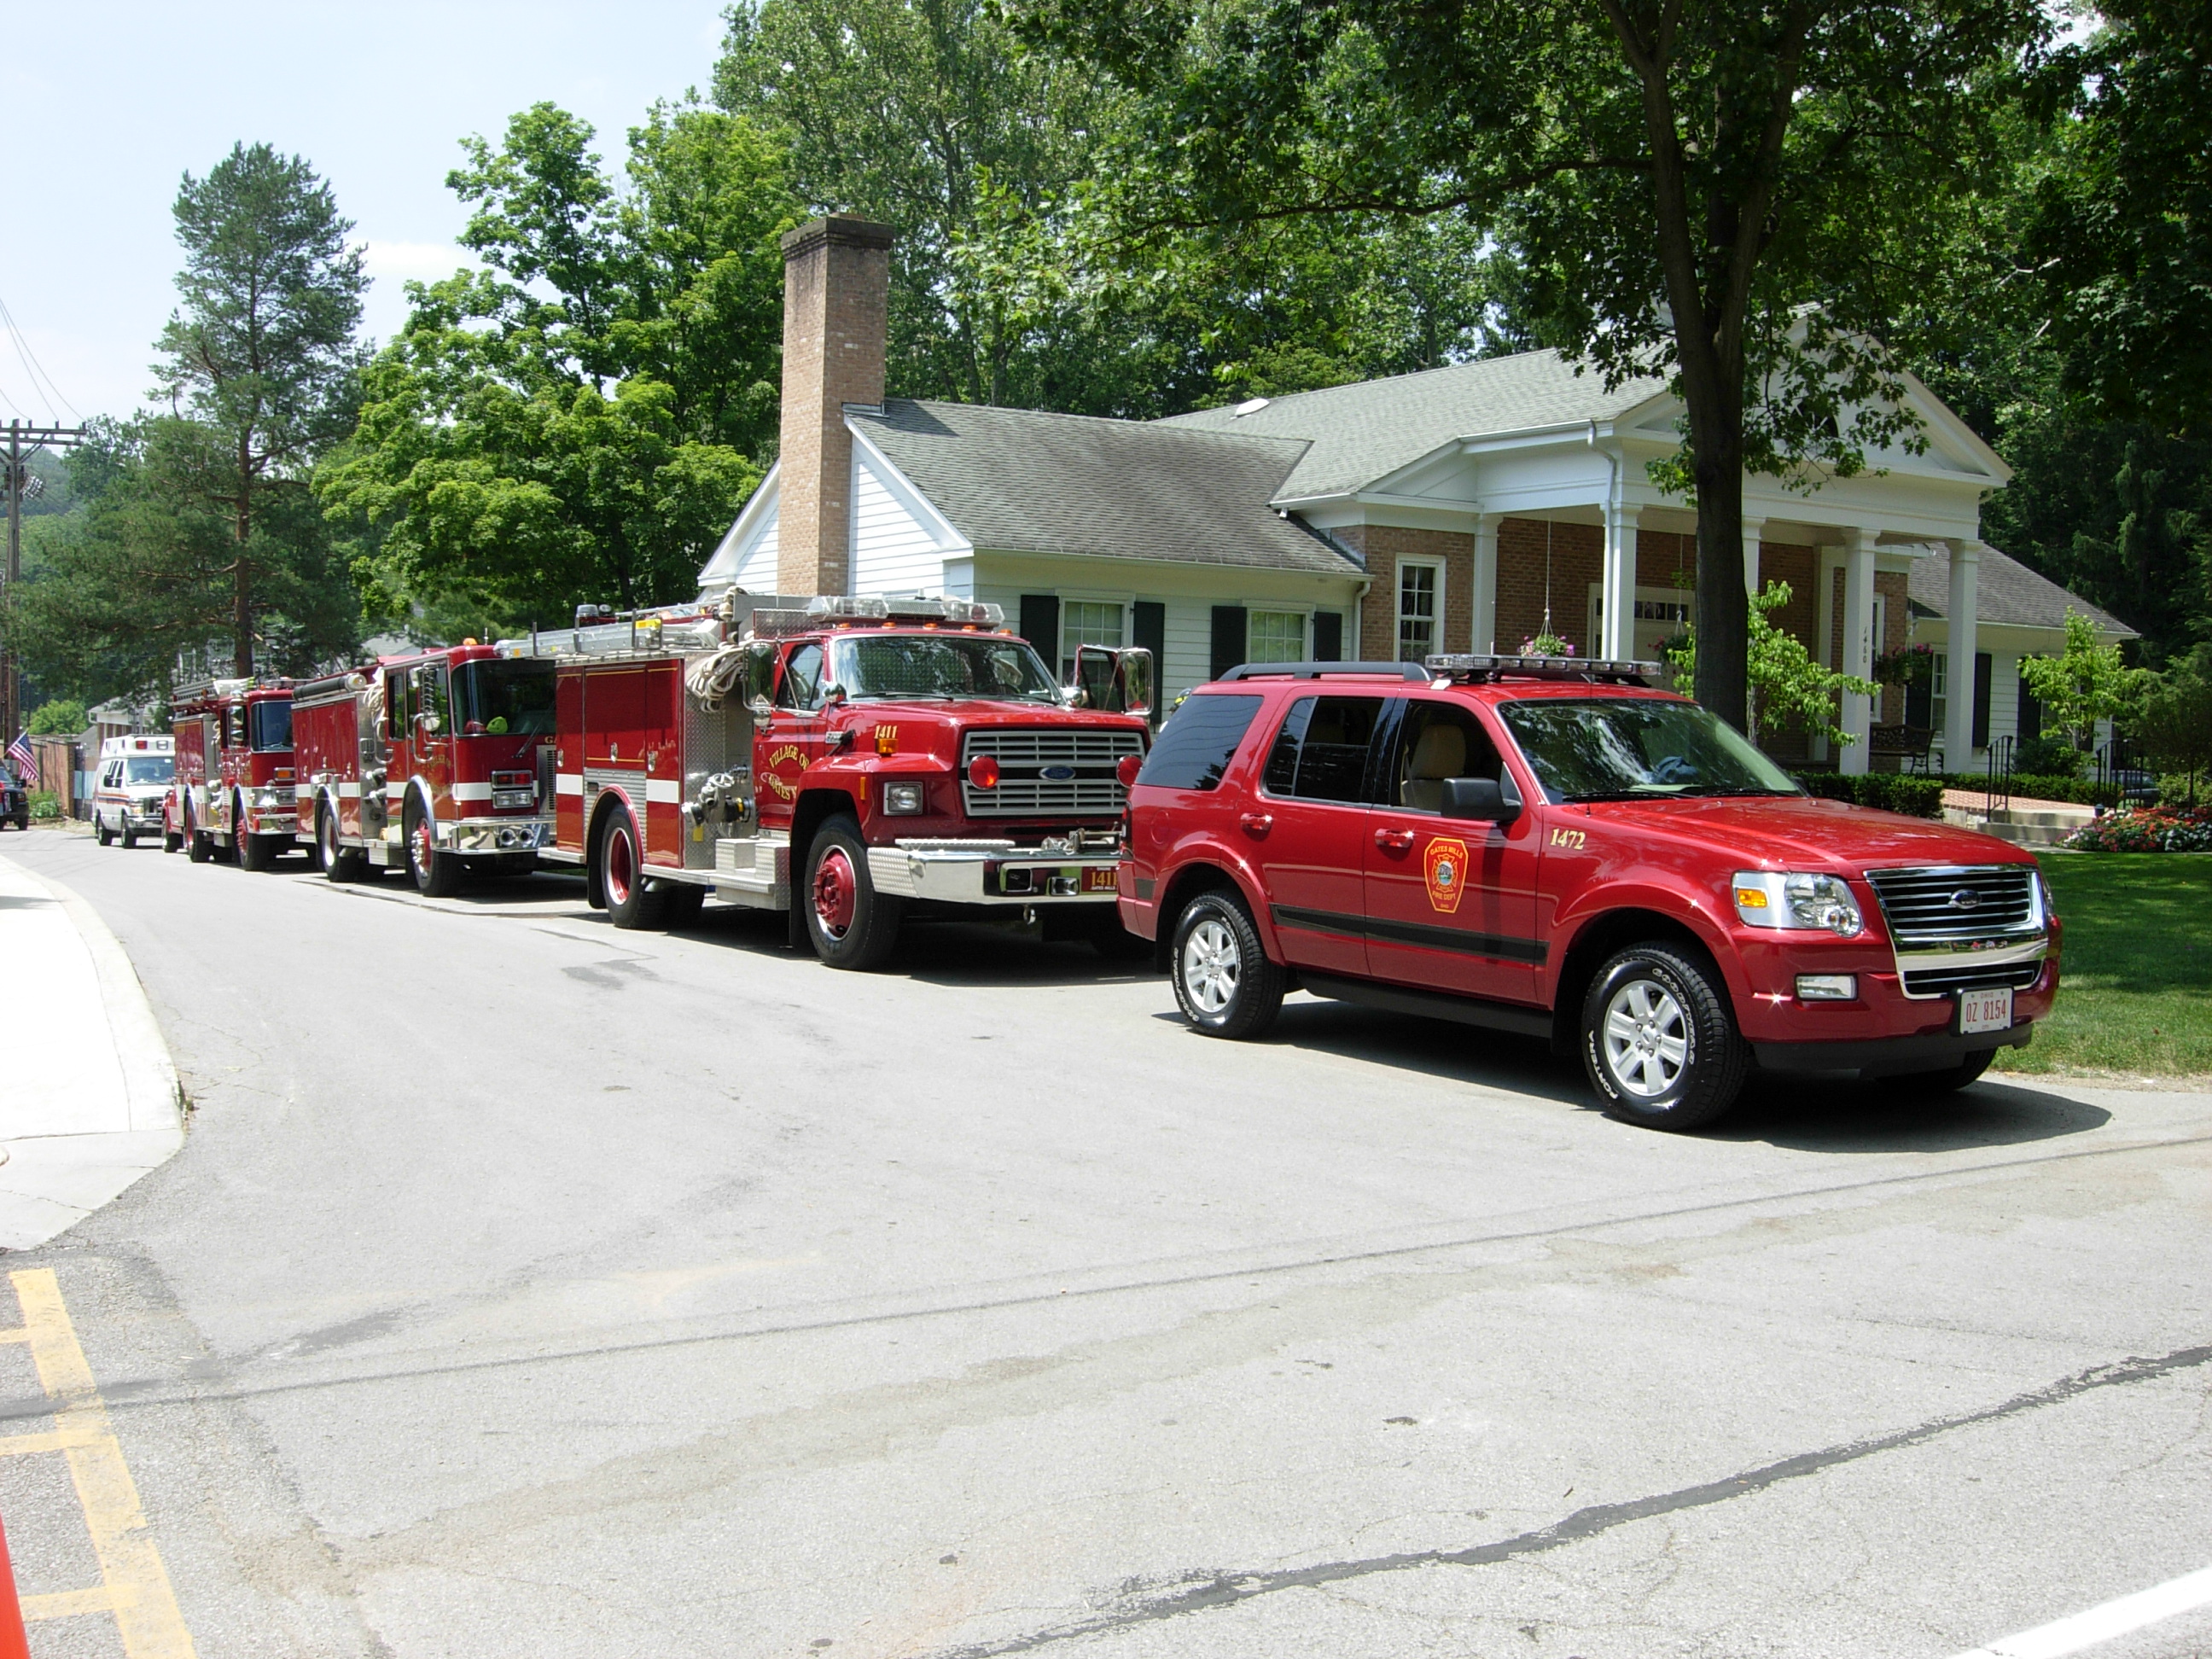 Fire Deparment Vehicles On Display.